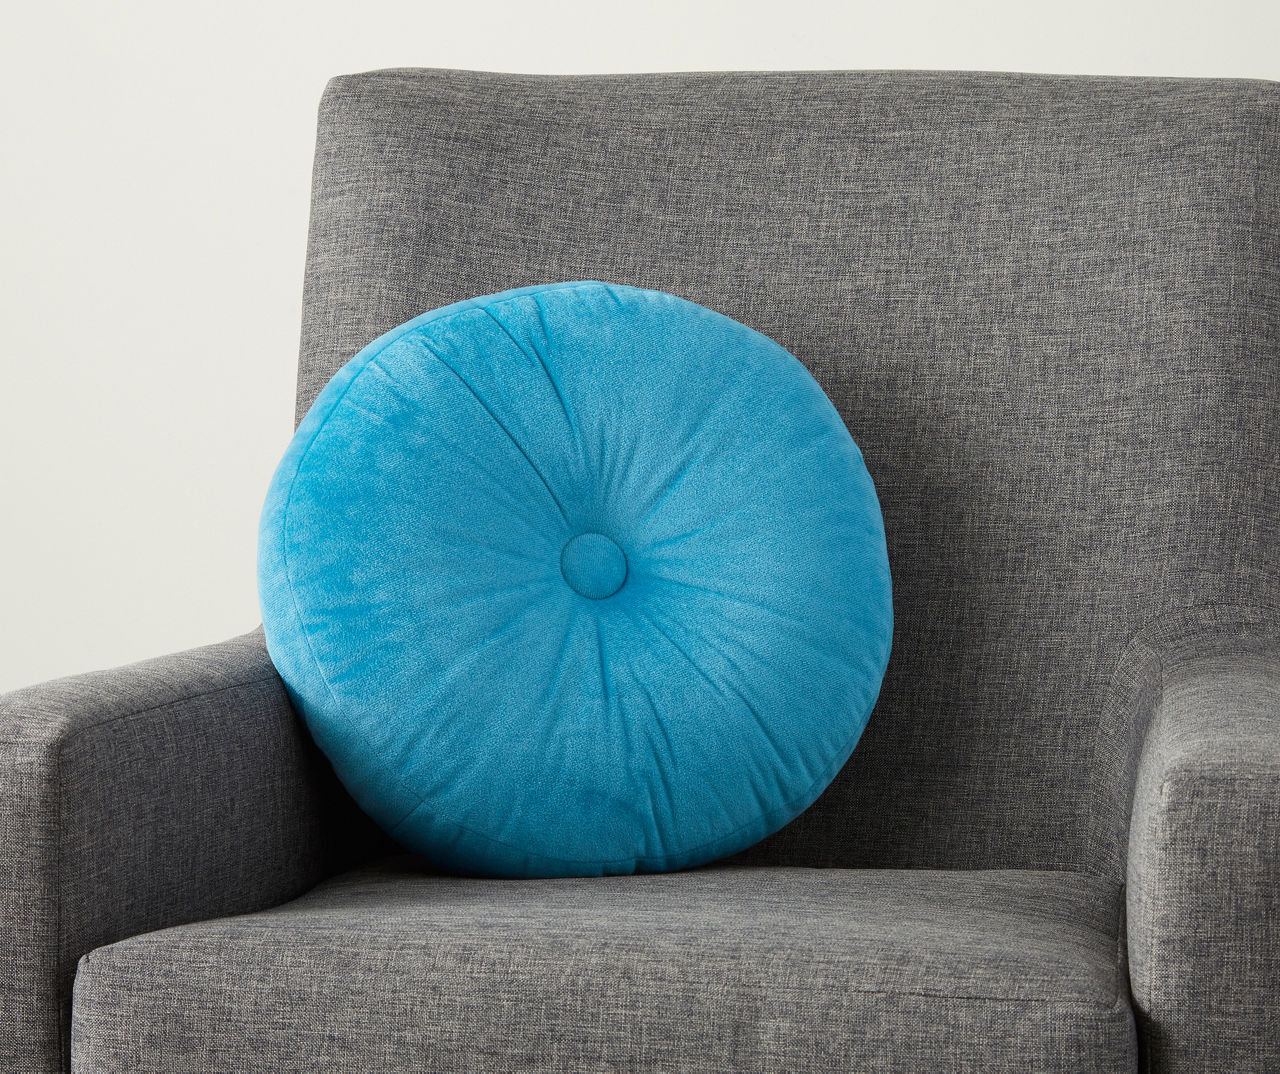 Teal Throw Pillows, Oversized or Small Decorative Pillow for Bed